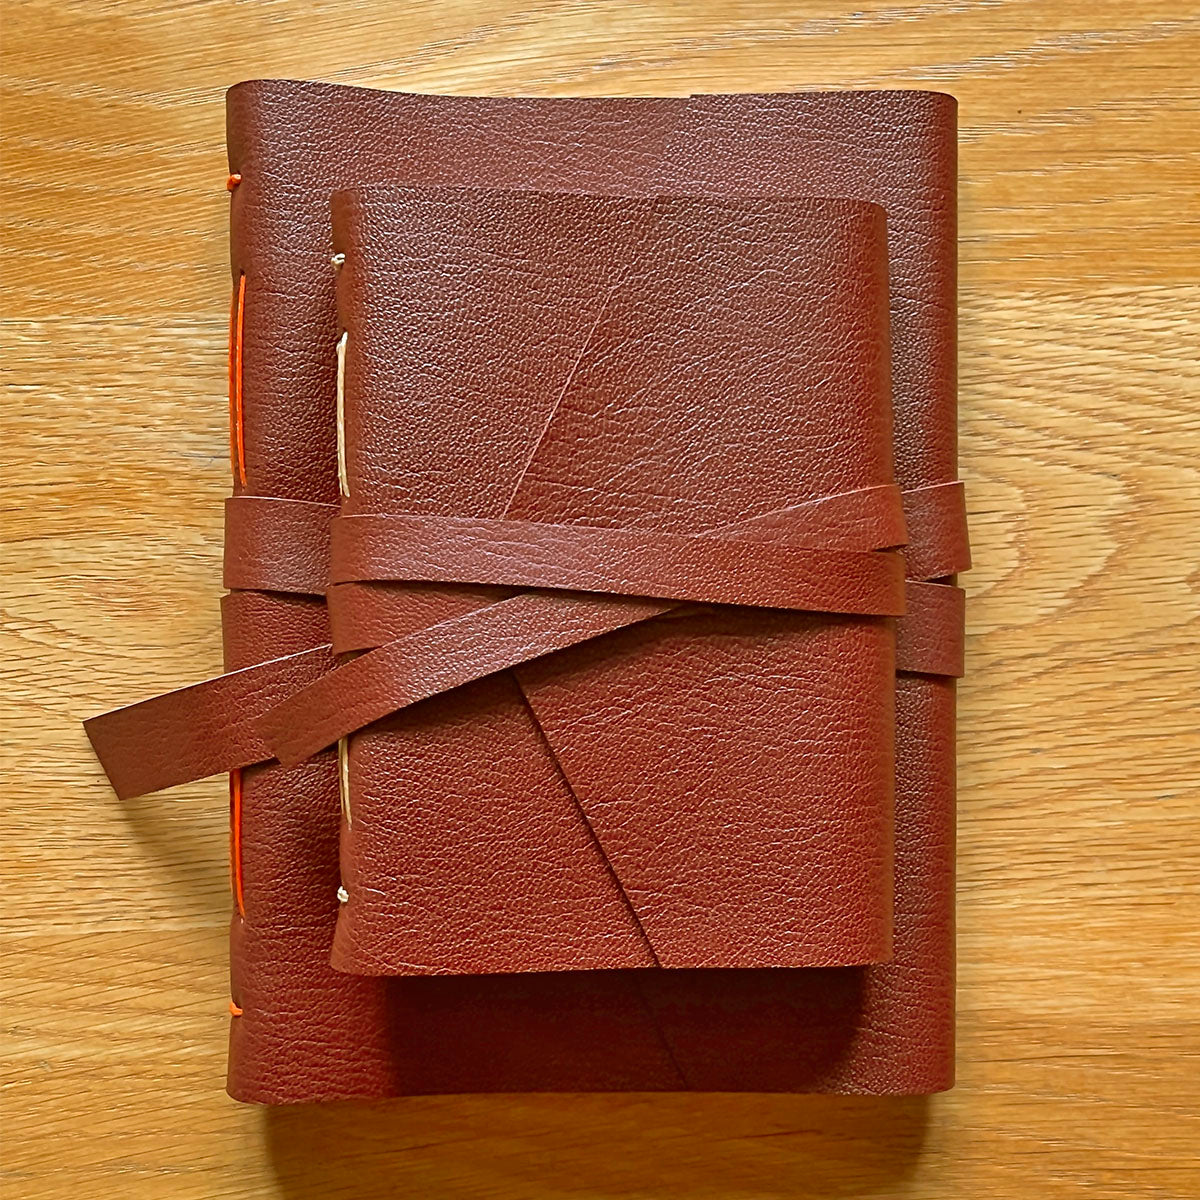 This A6 small leather journal sits atop the A5 version for comparison